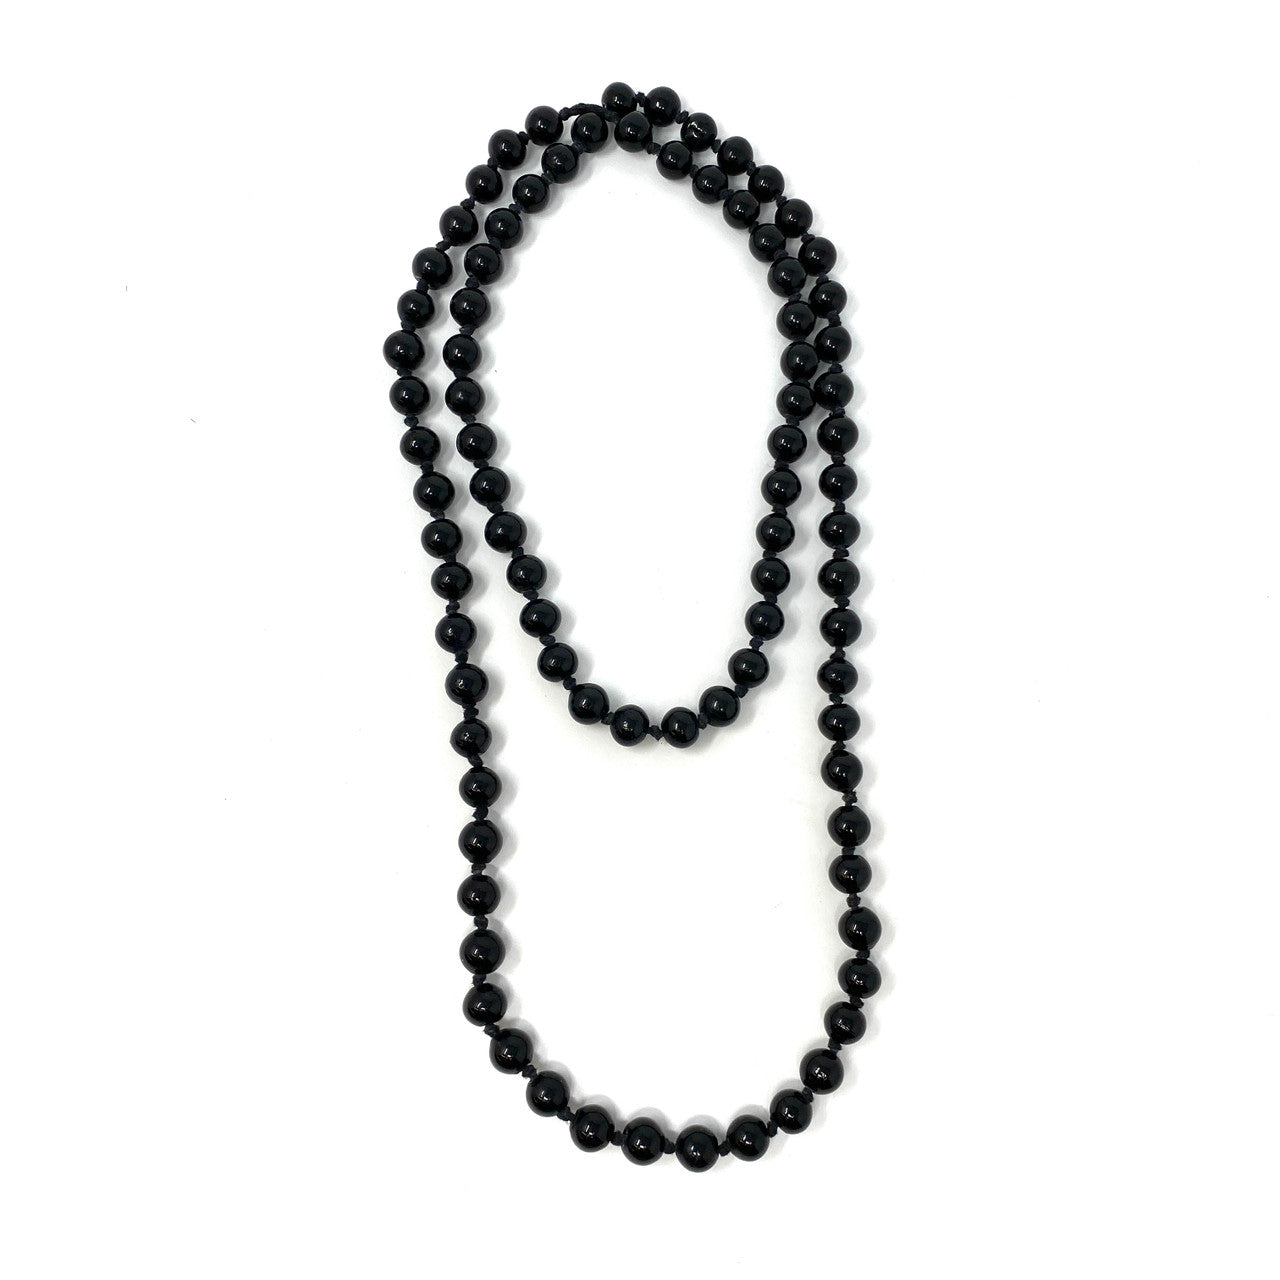 Black Beads Knotted Double Wrap Necklace- Thumbnail